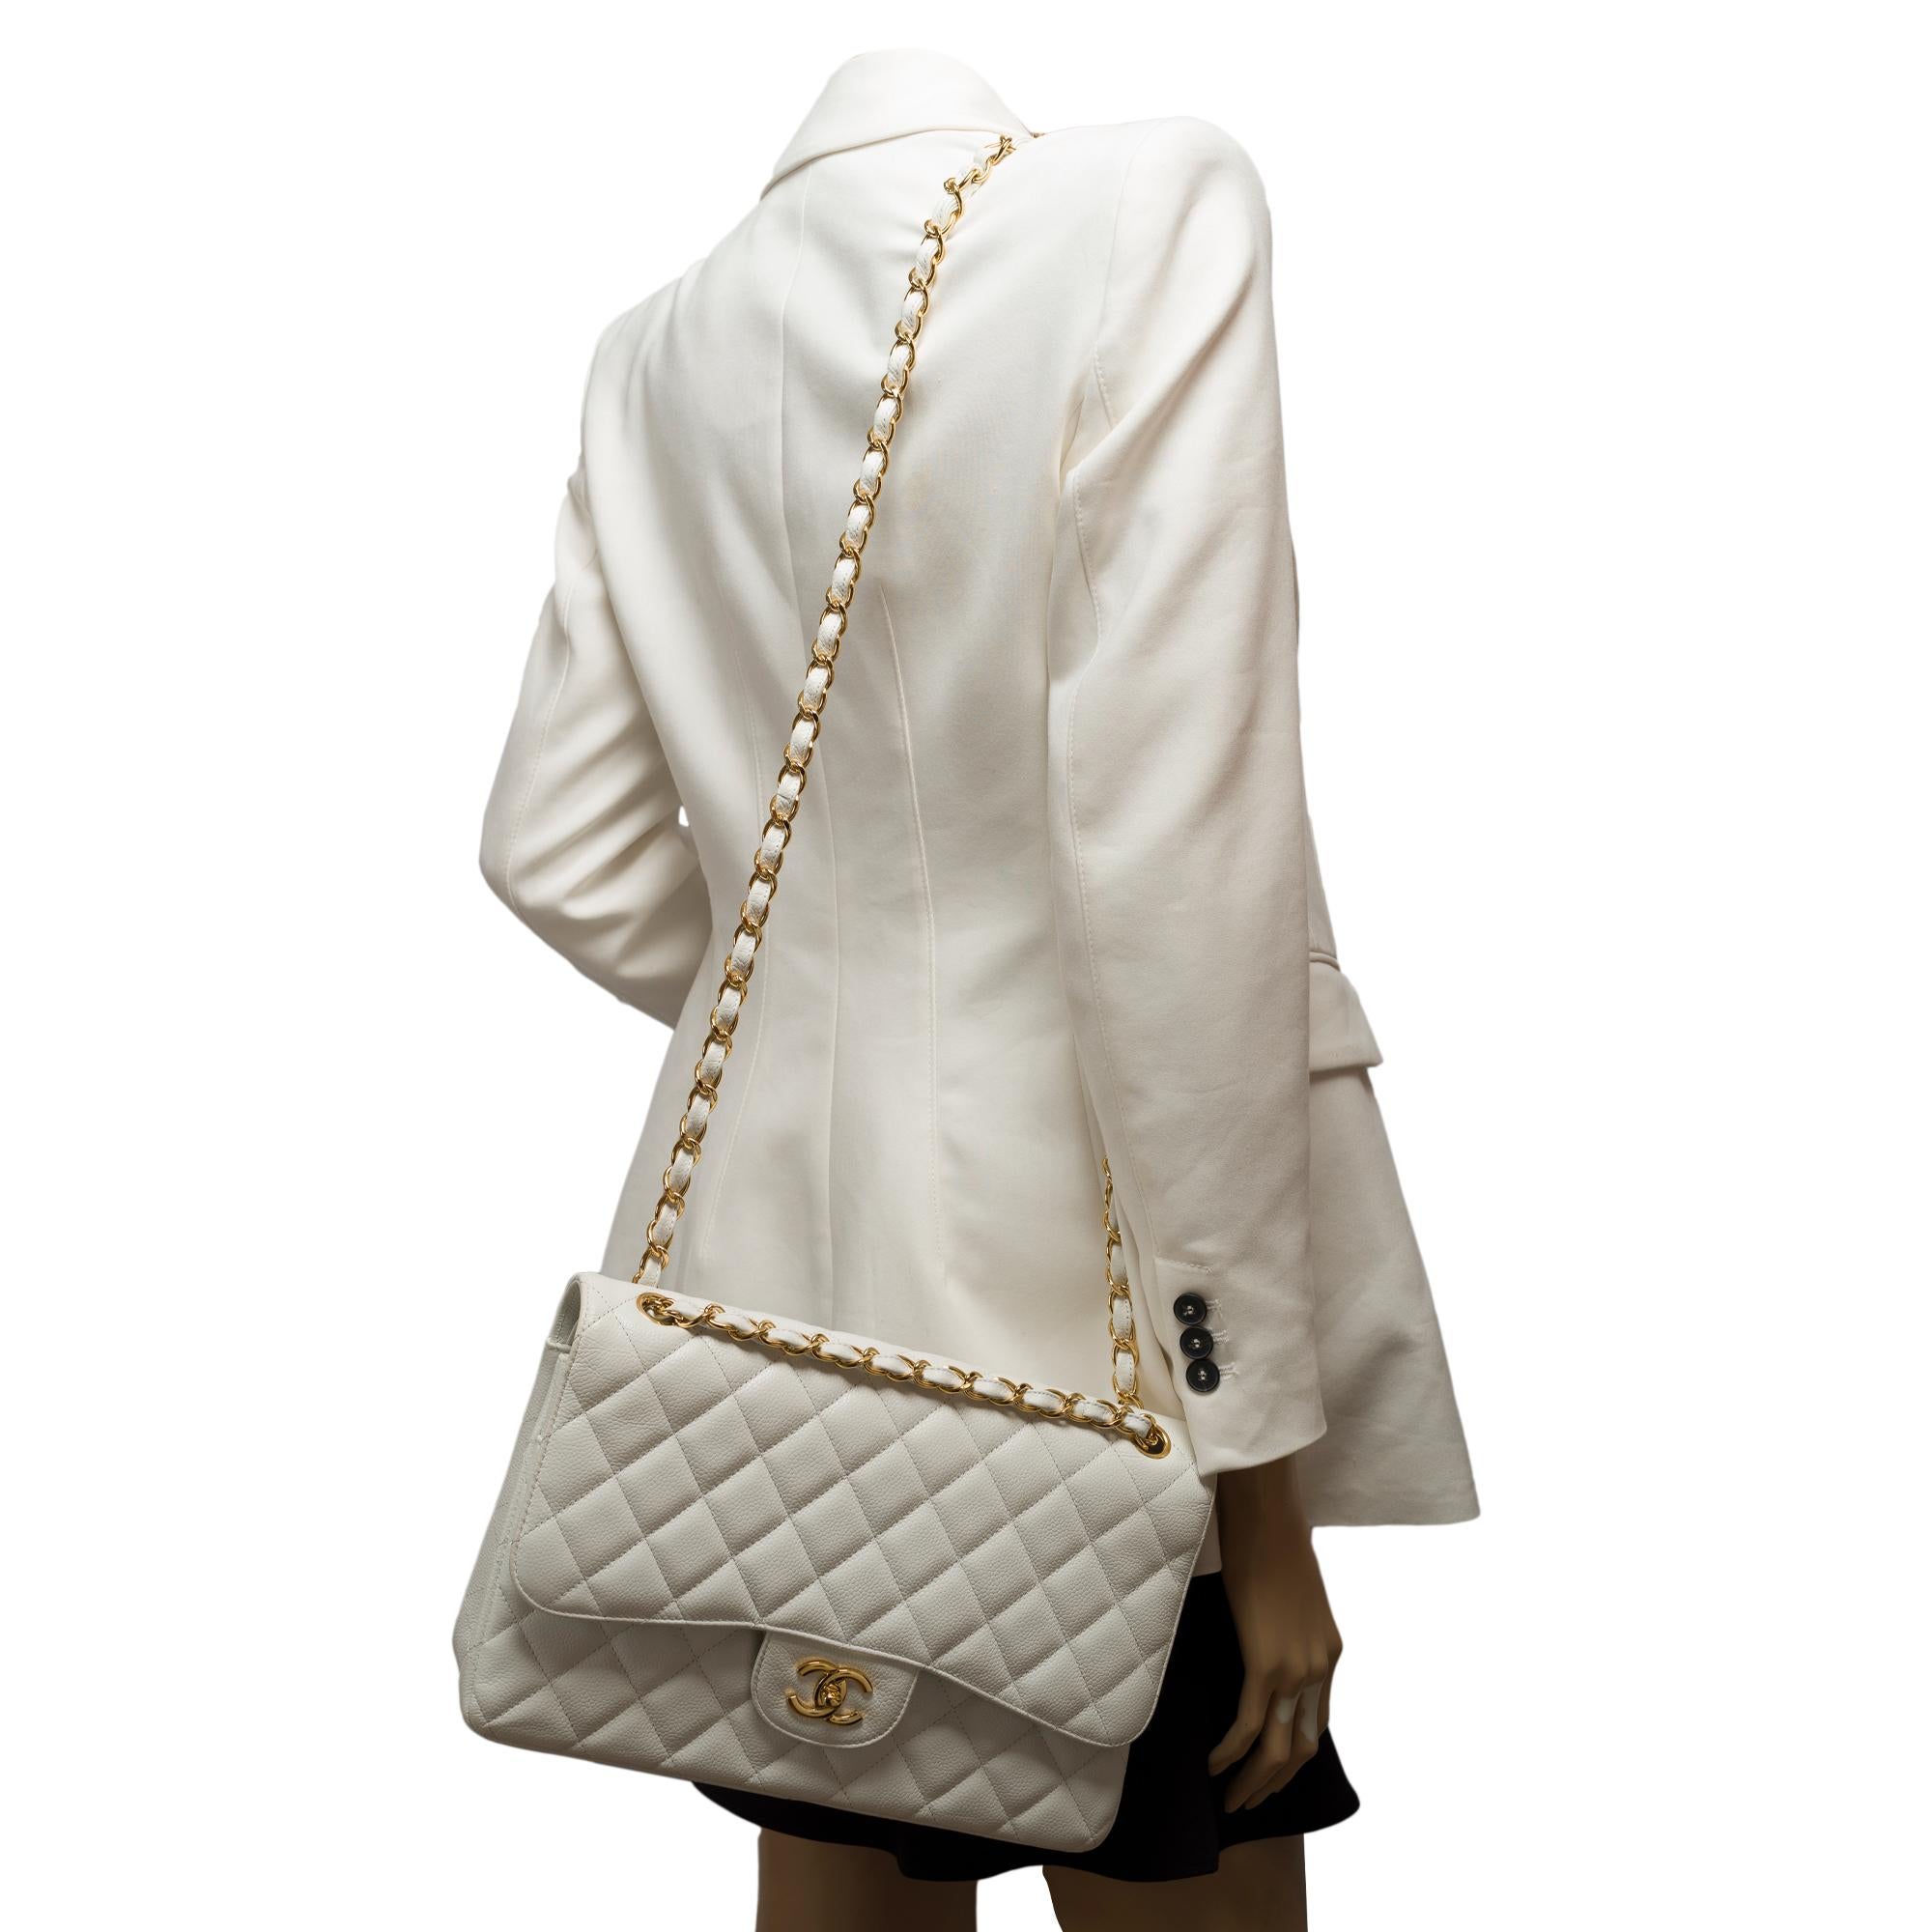 Chanel Timeless Jumbo double flap bag in White quilted Caviar leather, GHW For Sale 8